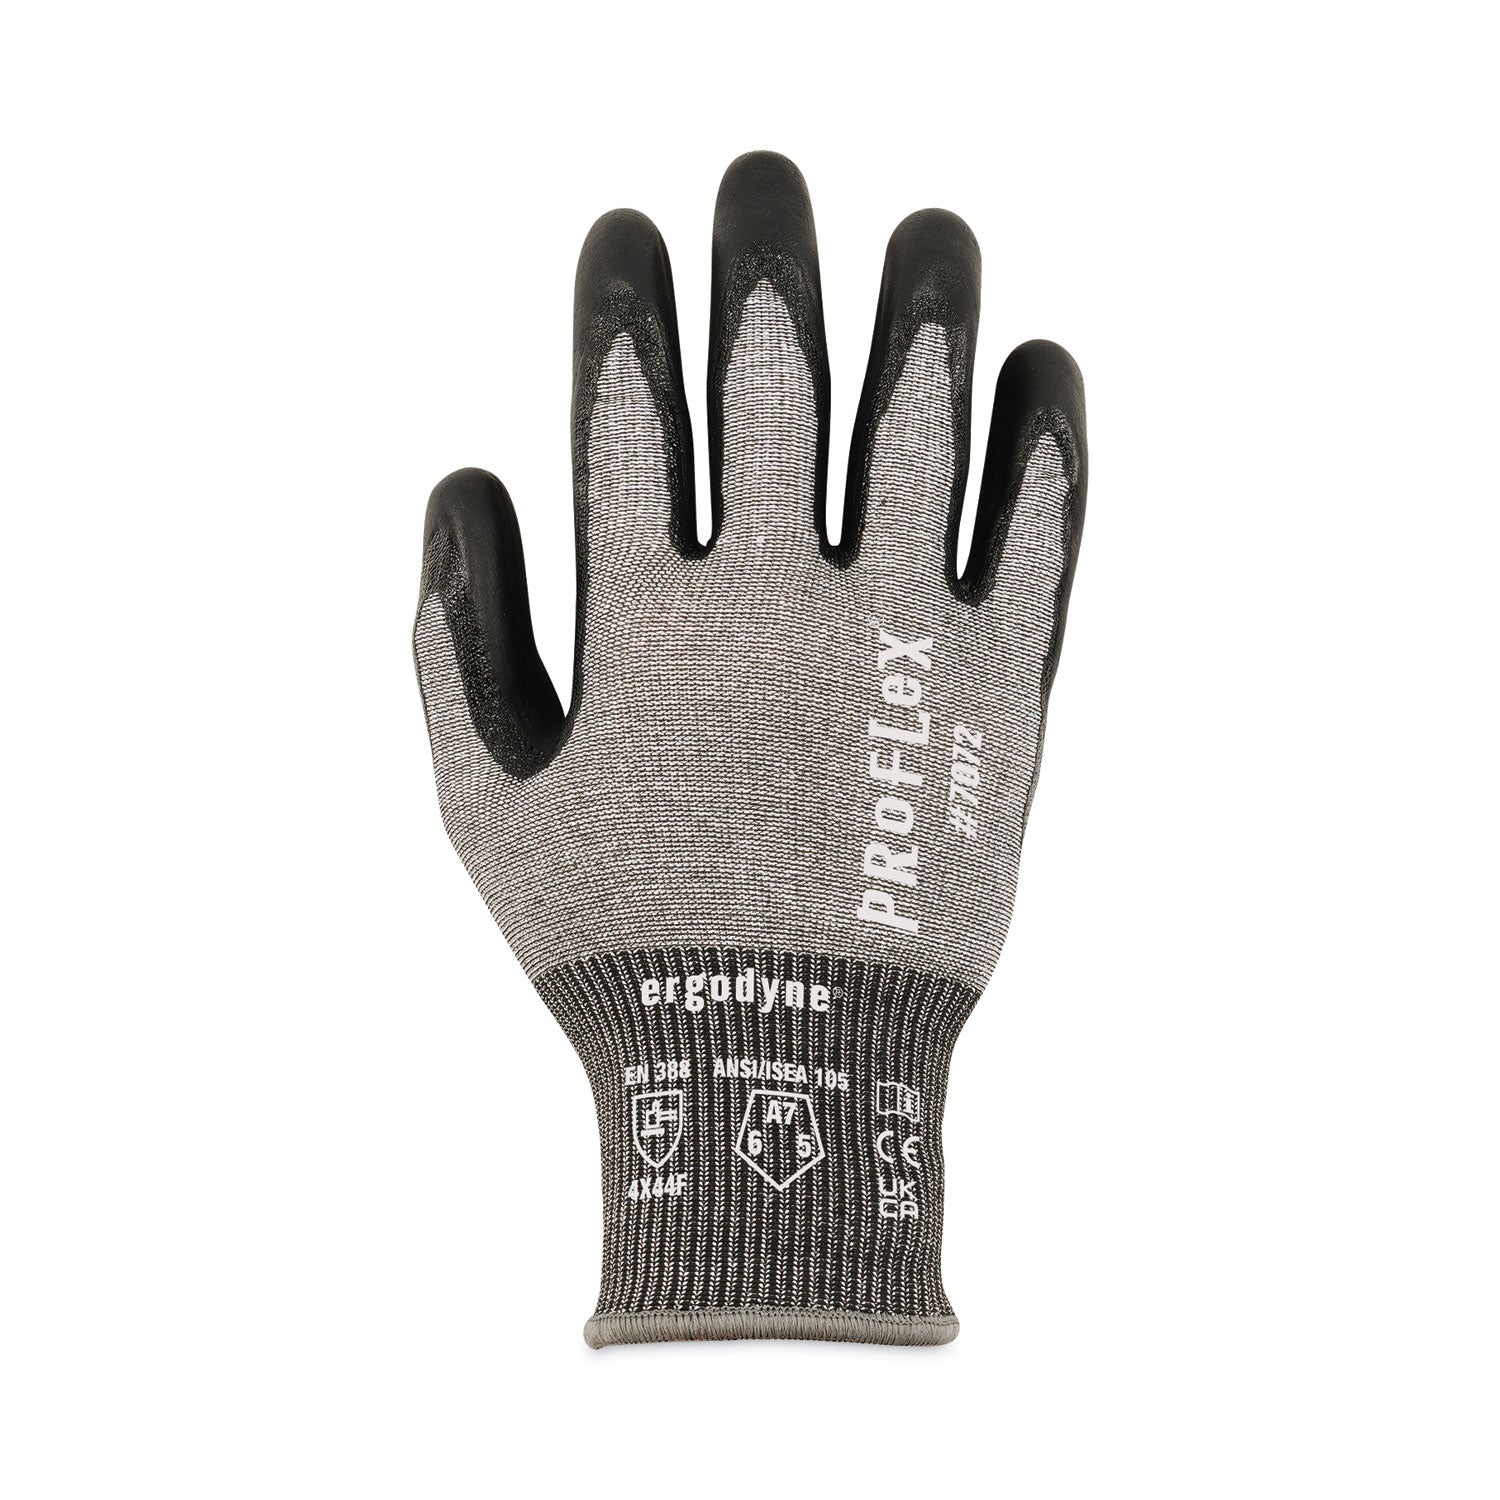 proflex-7072-ansi-a7-nitrile-coated-cr-gloves-gray-2x-large-pair-ships-in-1-3-business-days_ego10316 - 3